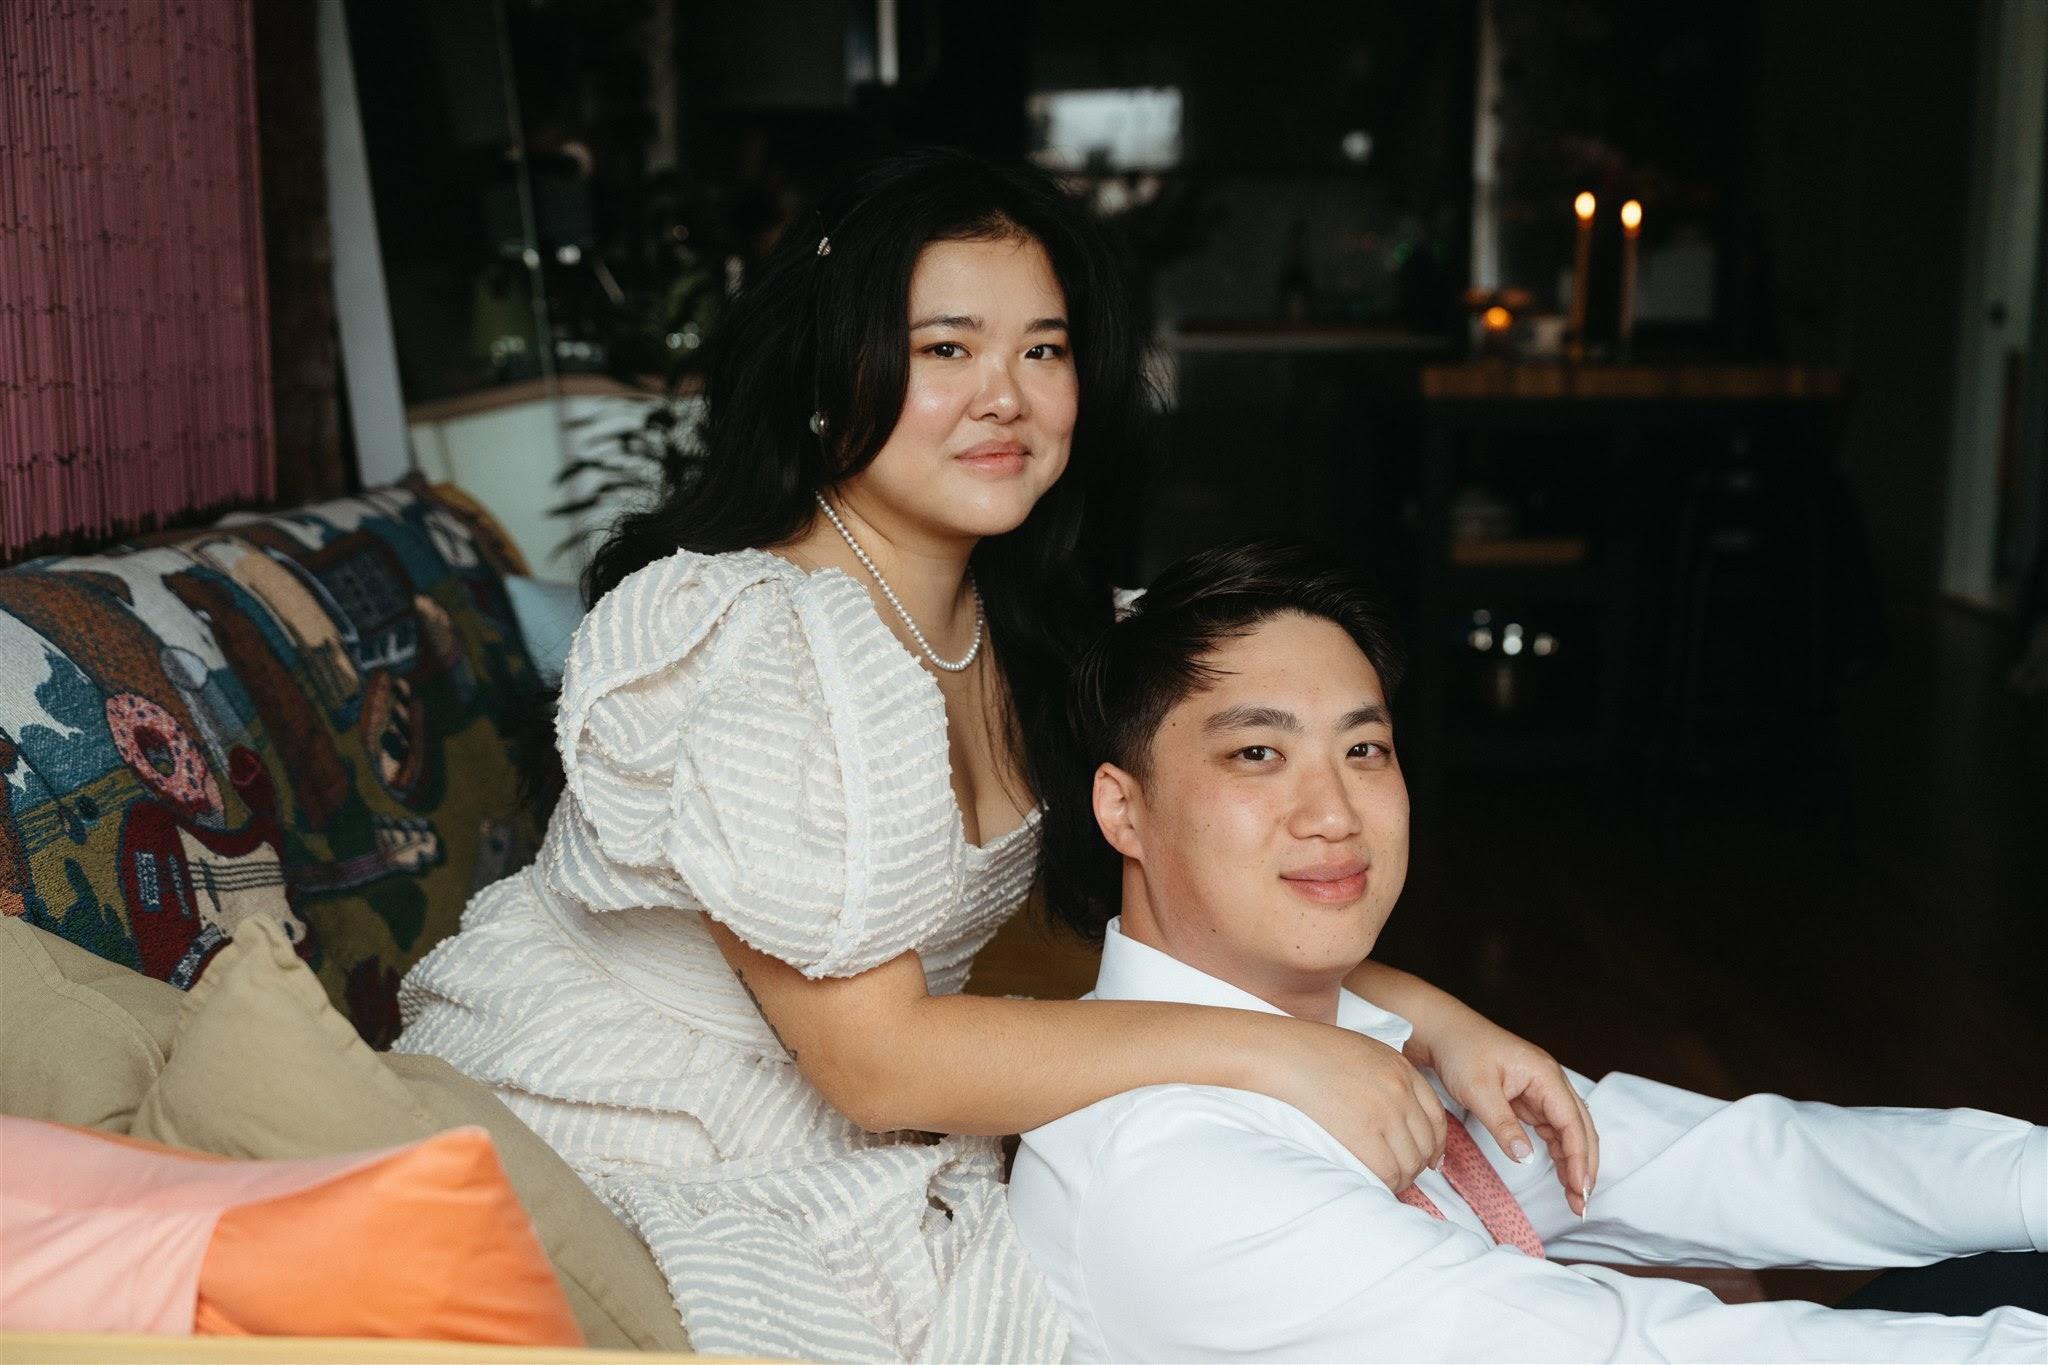 The Wedding Website of Nicole Chen and Jason Yang